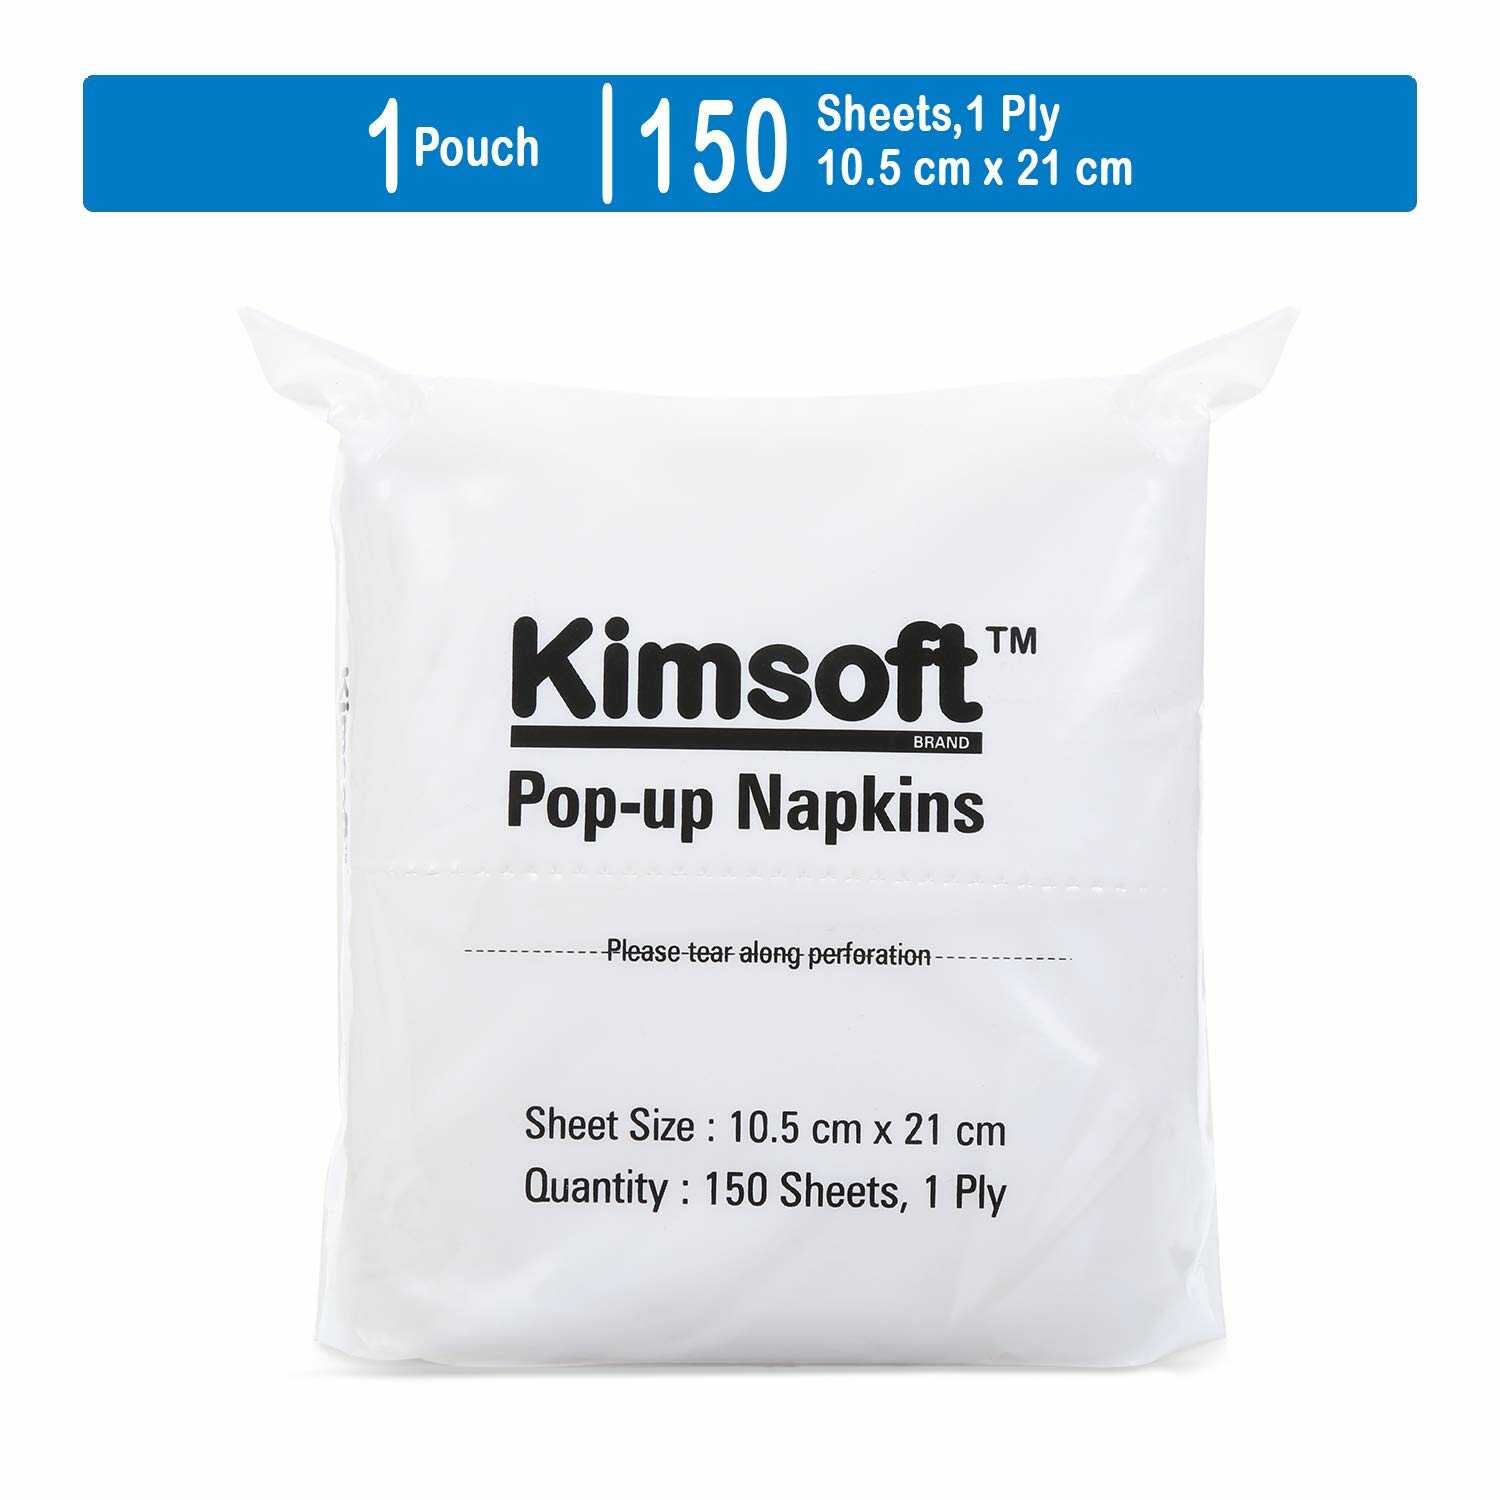 Kimberly Clark* Scott* Essential Pop-up Napkin, 1234 (Pack of 150 Pkt/Case, 150 Sheets/Pkt, Total 22500 Sheets)